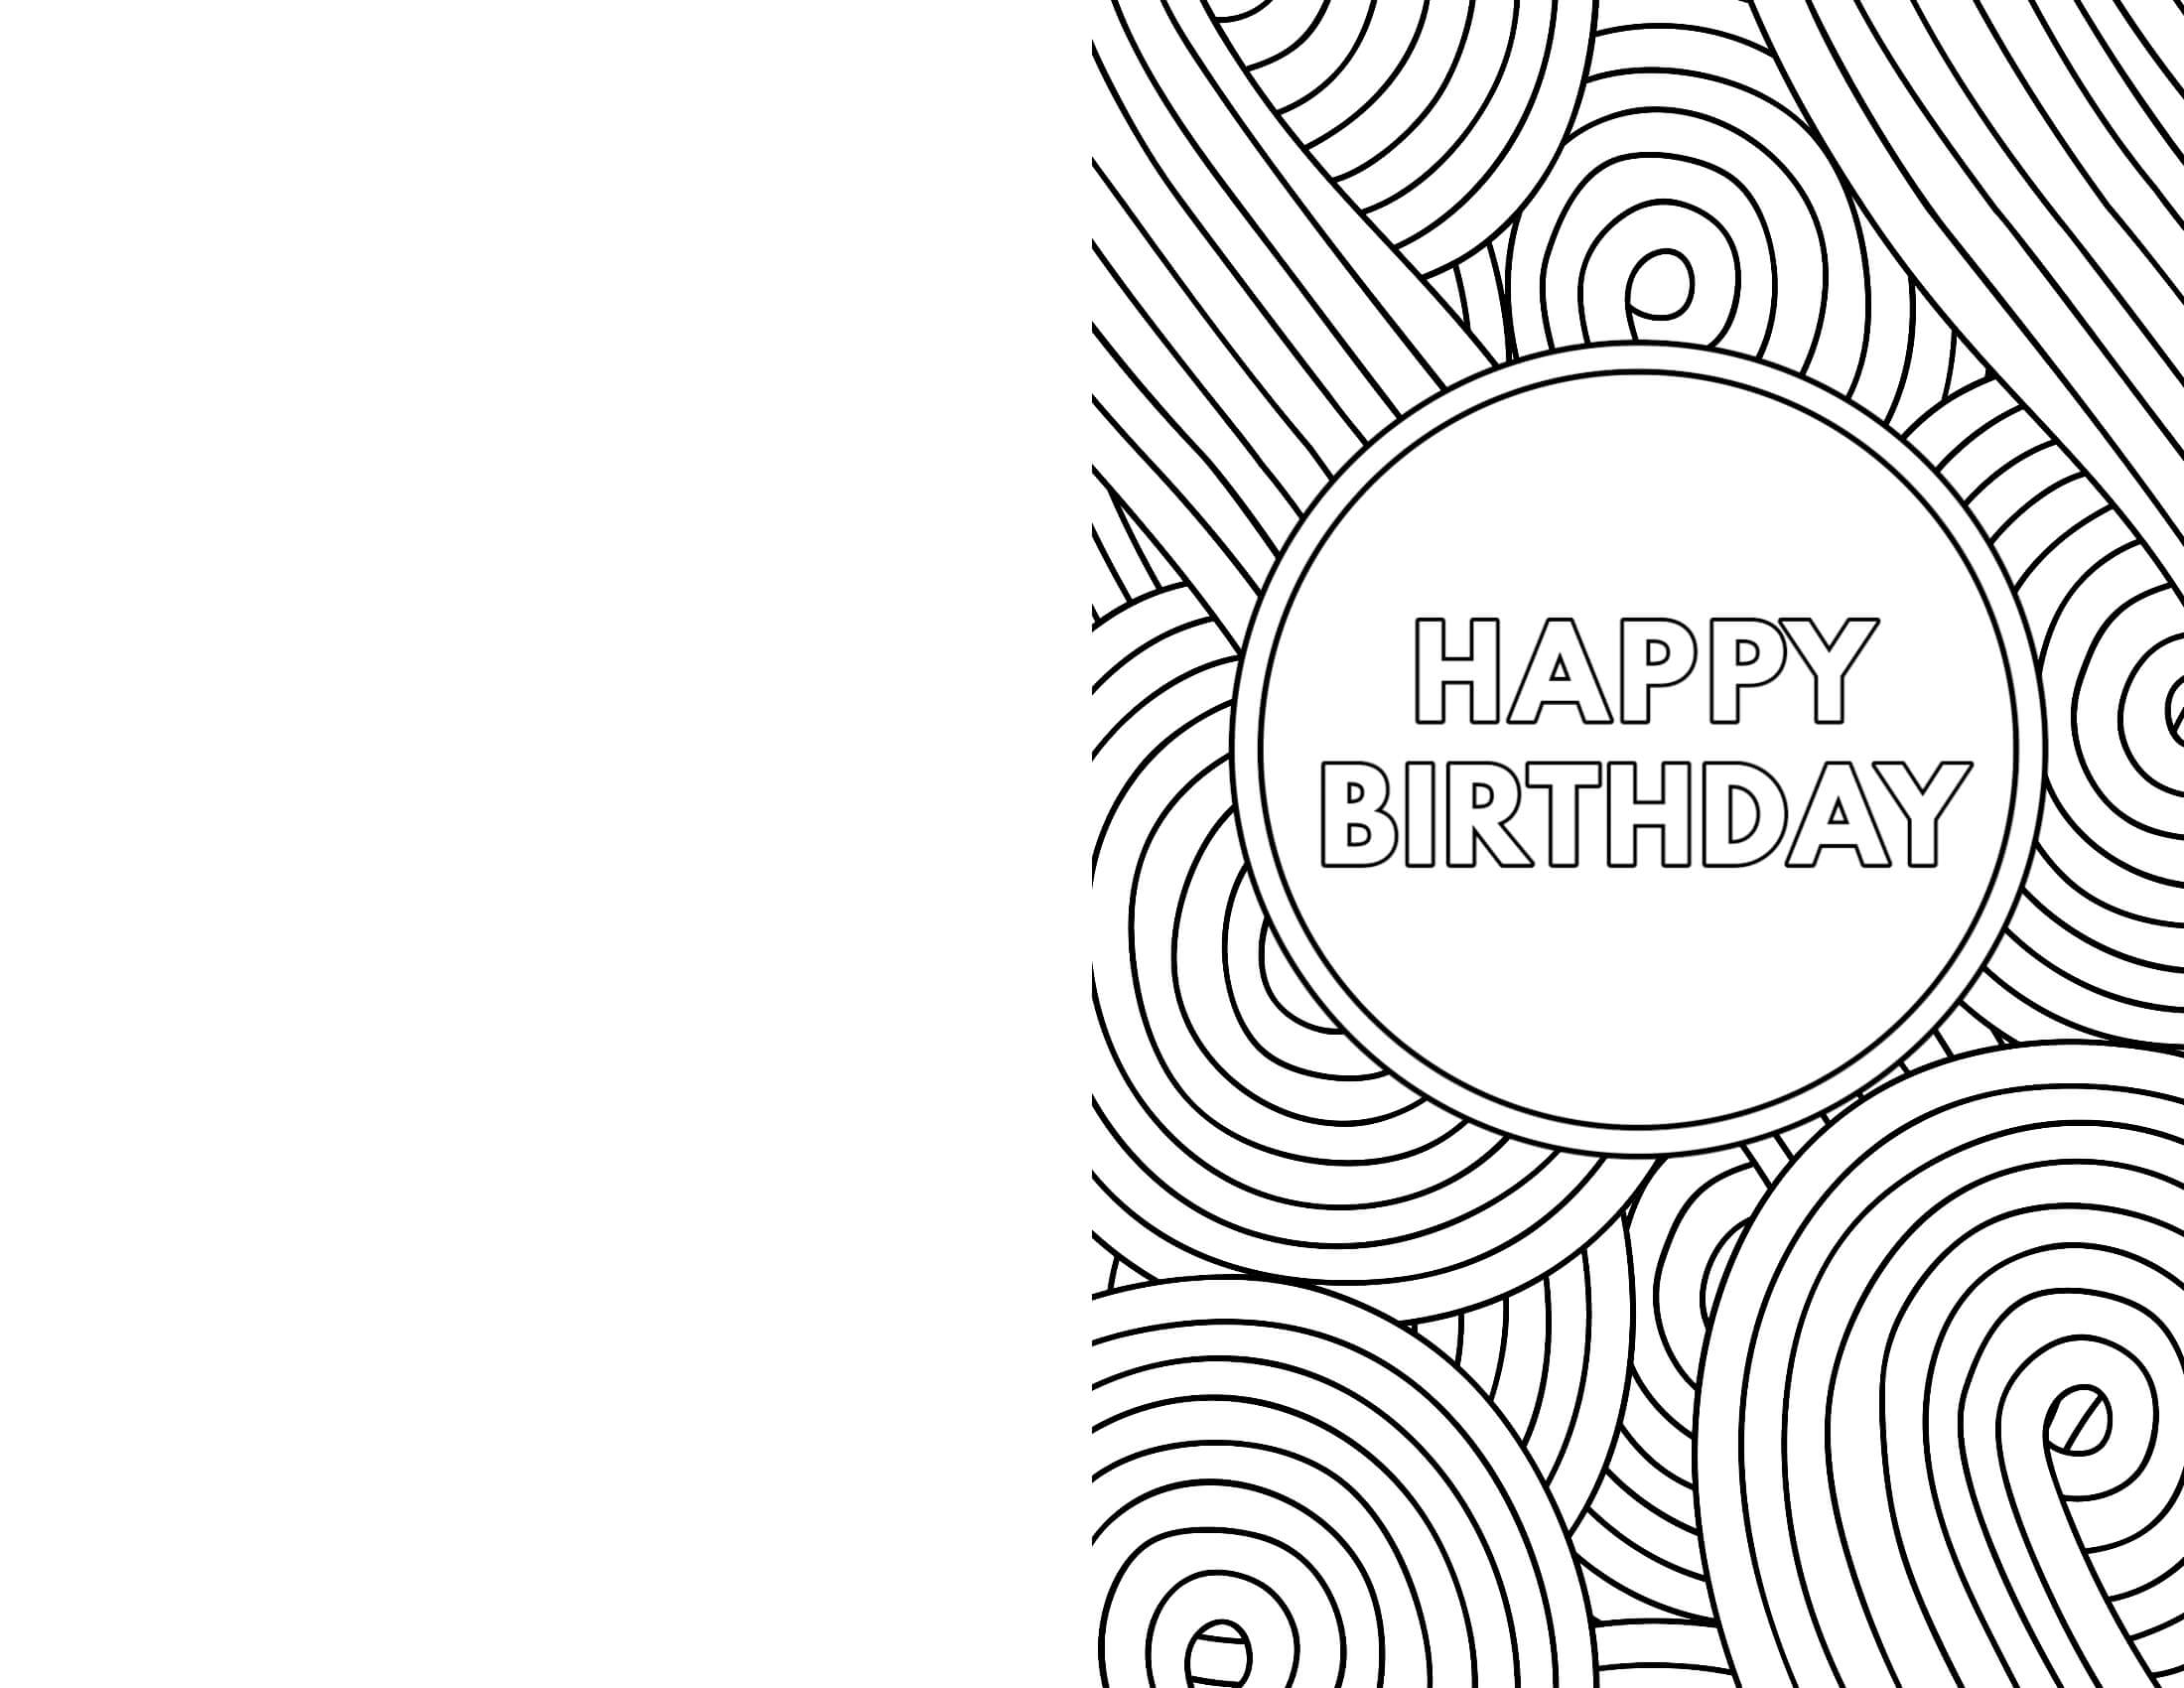 Coloring Book Incredible Happy Birthday Card Coloringes with Foldable